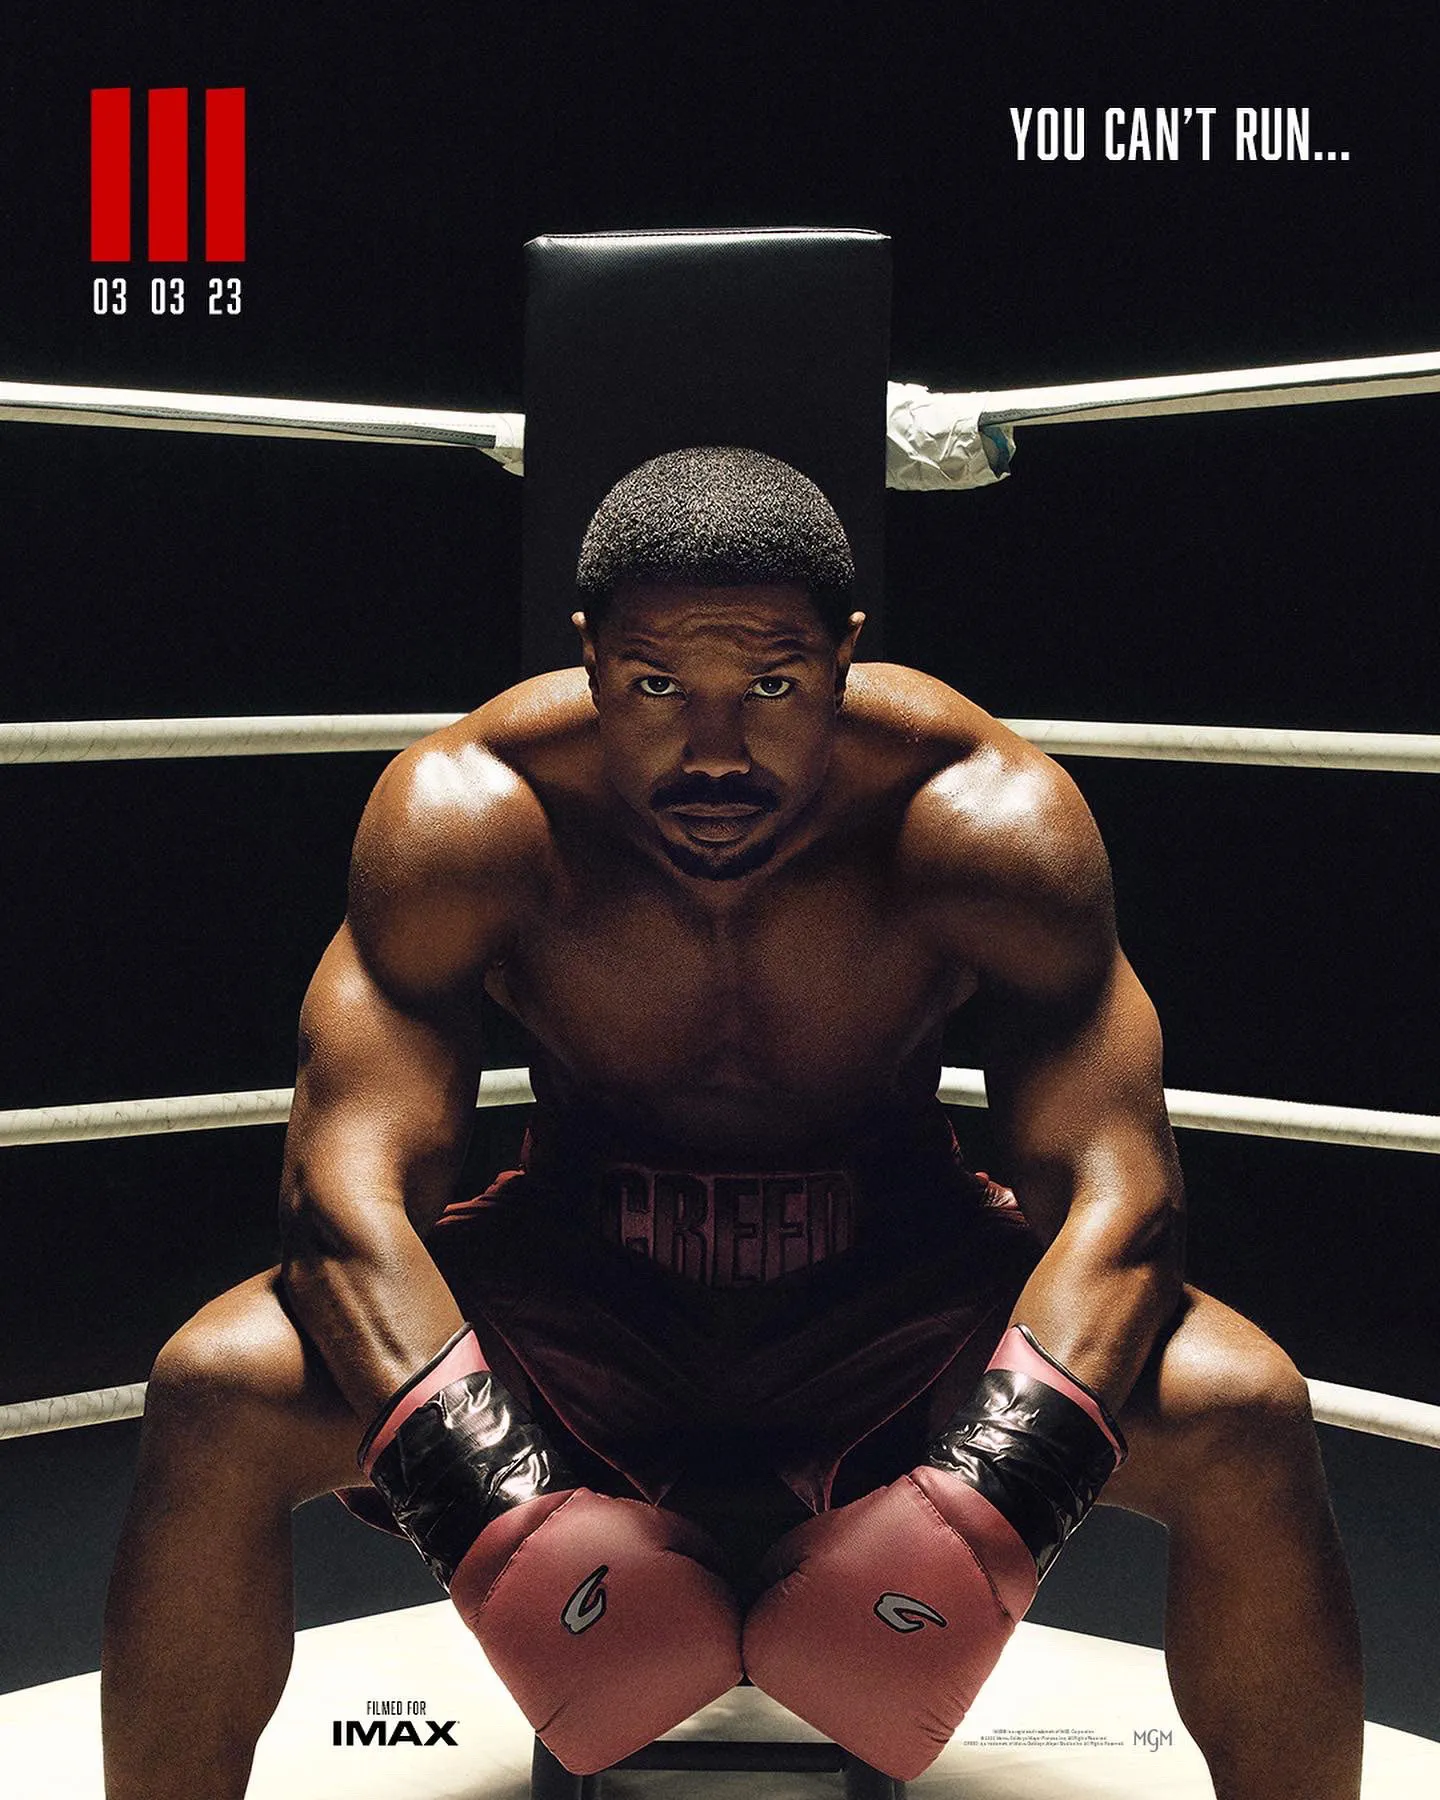 POster featuring Adonis Creed in the corner looking straight forward